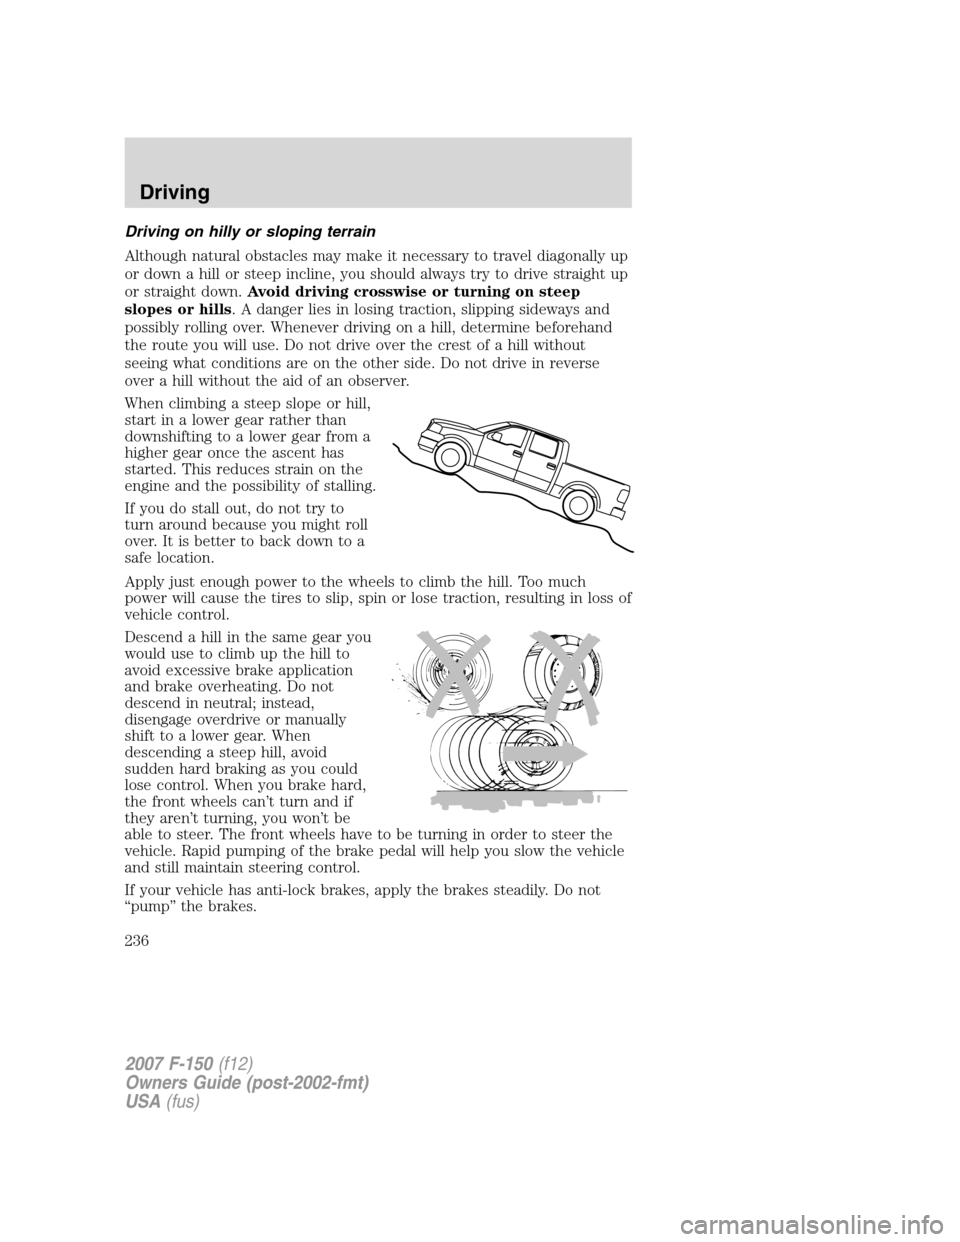 FORD F150 2007 11.G User Guide Driving on hilly or sloping terrain
Although natural obstacles may make it necessary to travel diagonally up
or down a hill or steep incline, you should always try to drive straight up
or straight dow